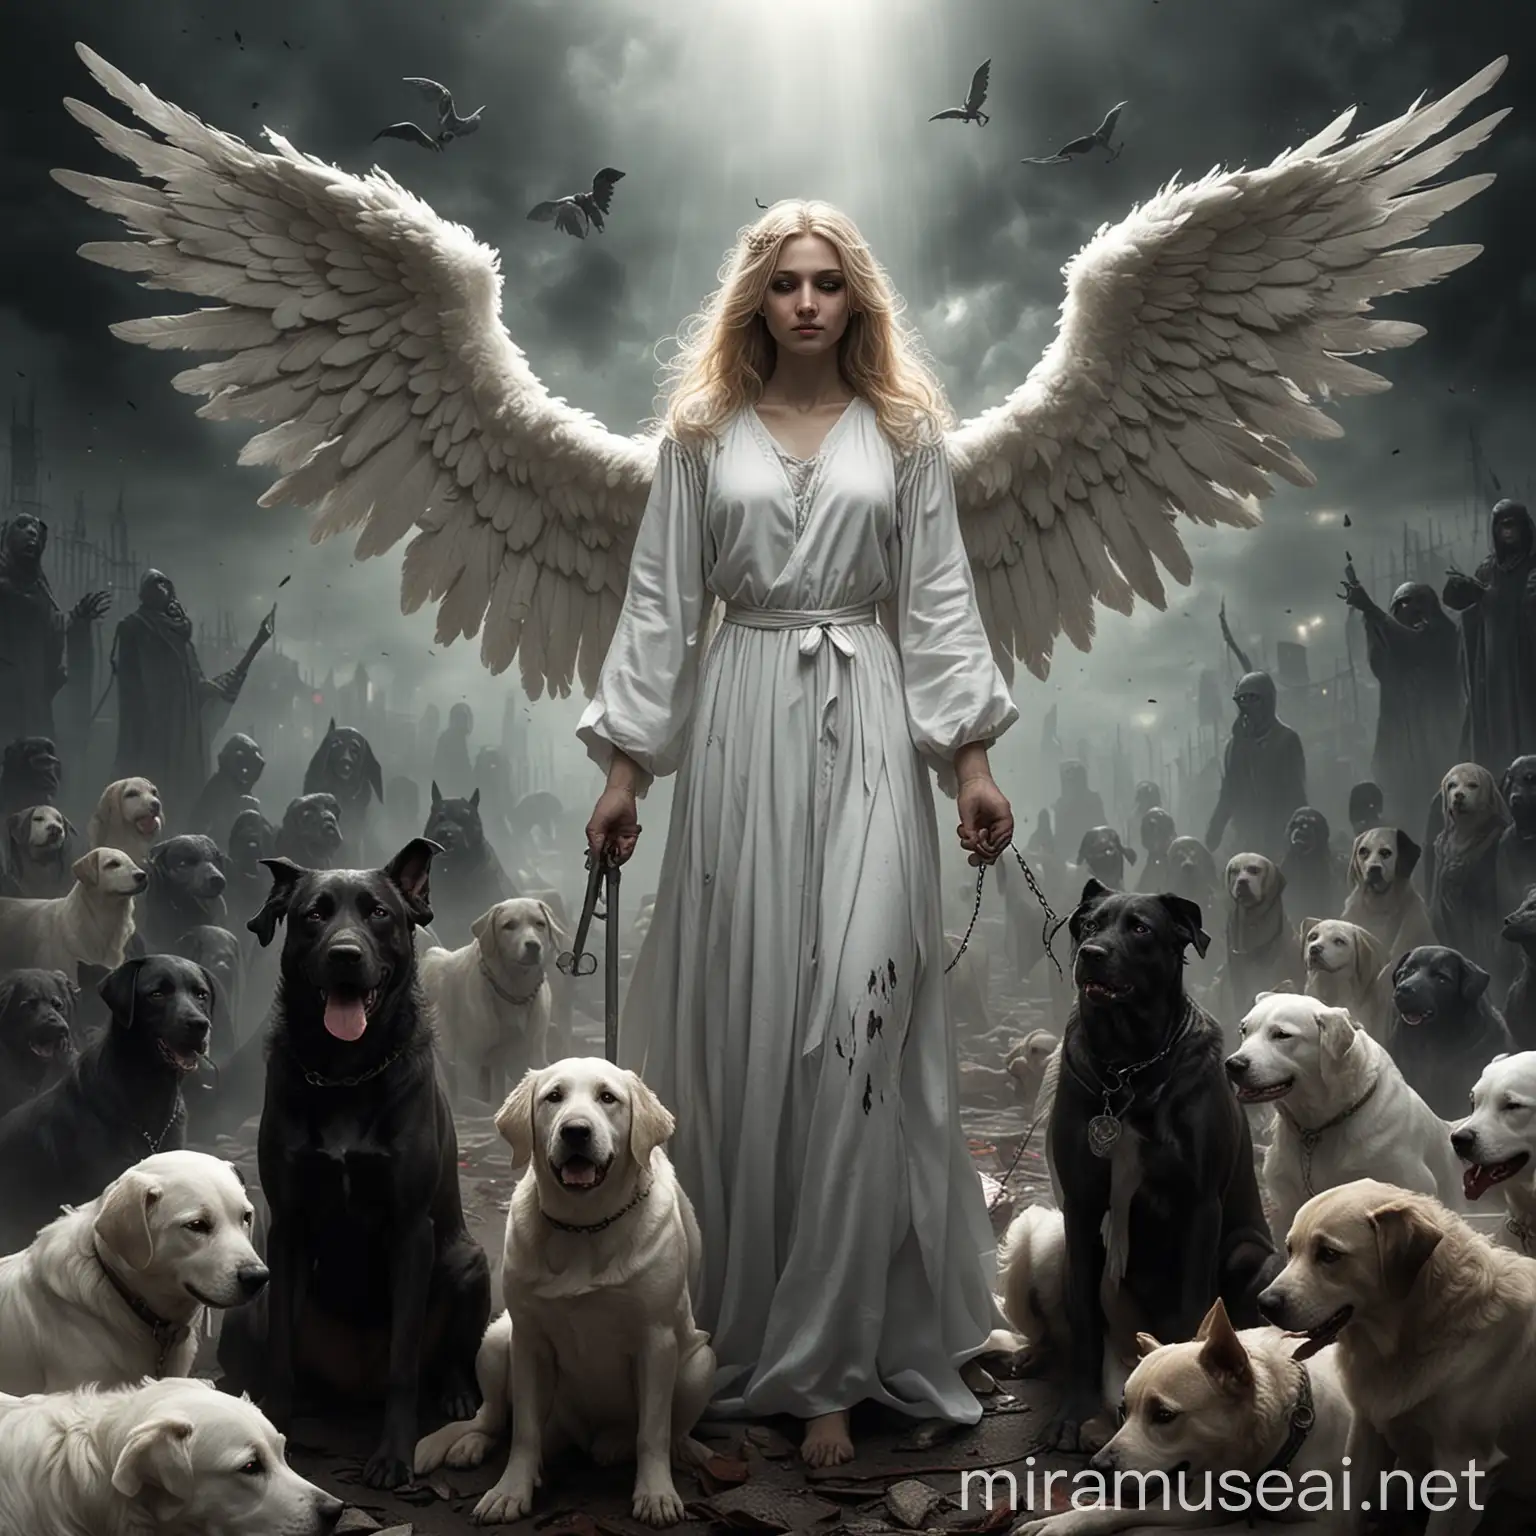 Sinister Scene Humanized Dog Angels and Evils Surrounded by Souls